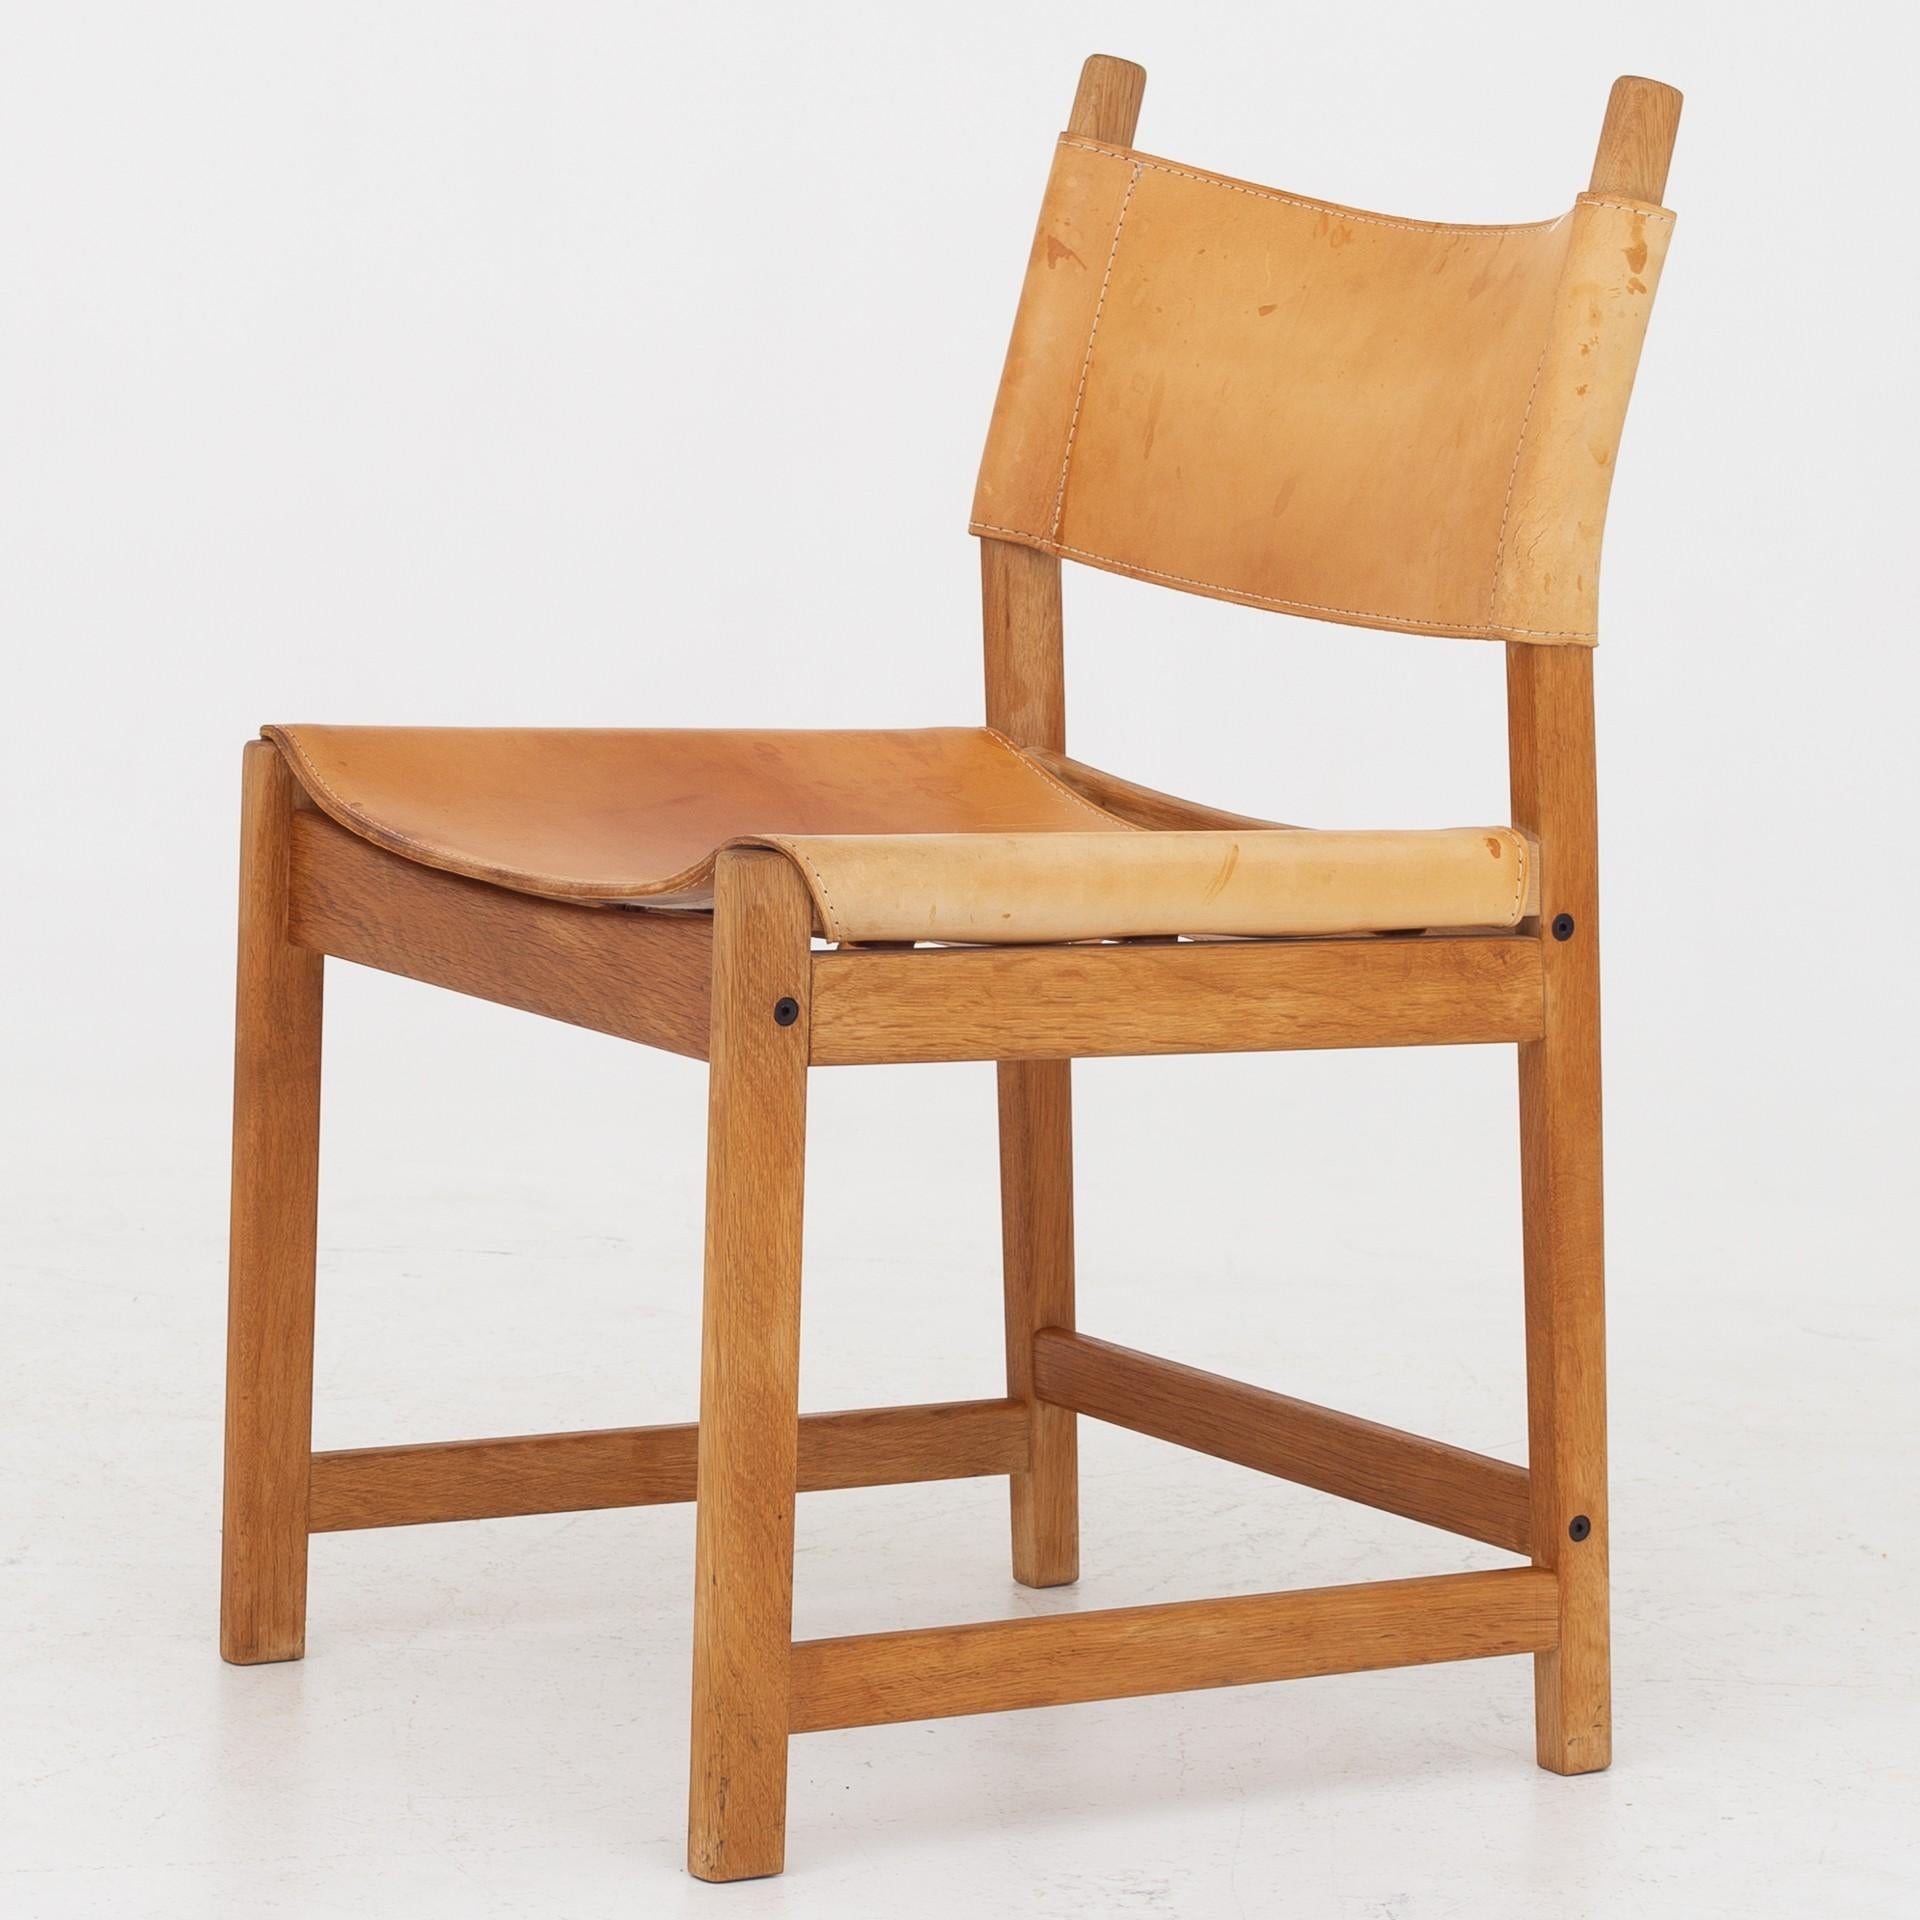 Six dining chairs in oak and patinated natural leather. Maker KP Møbler.